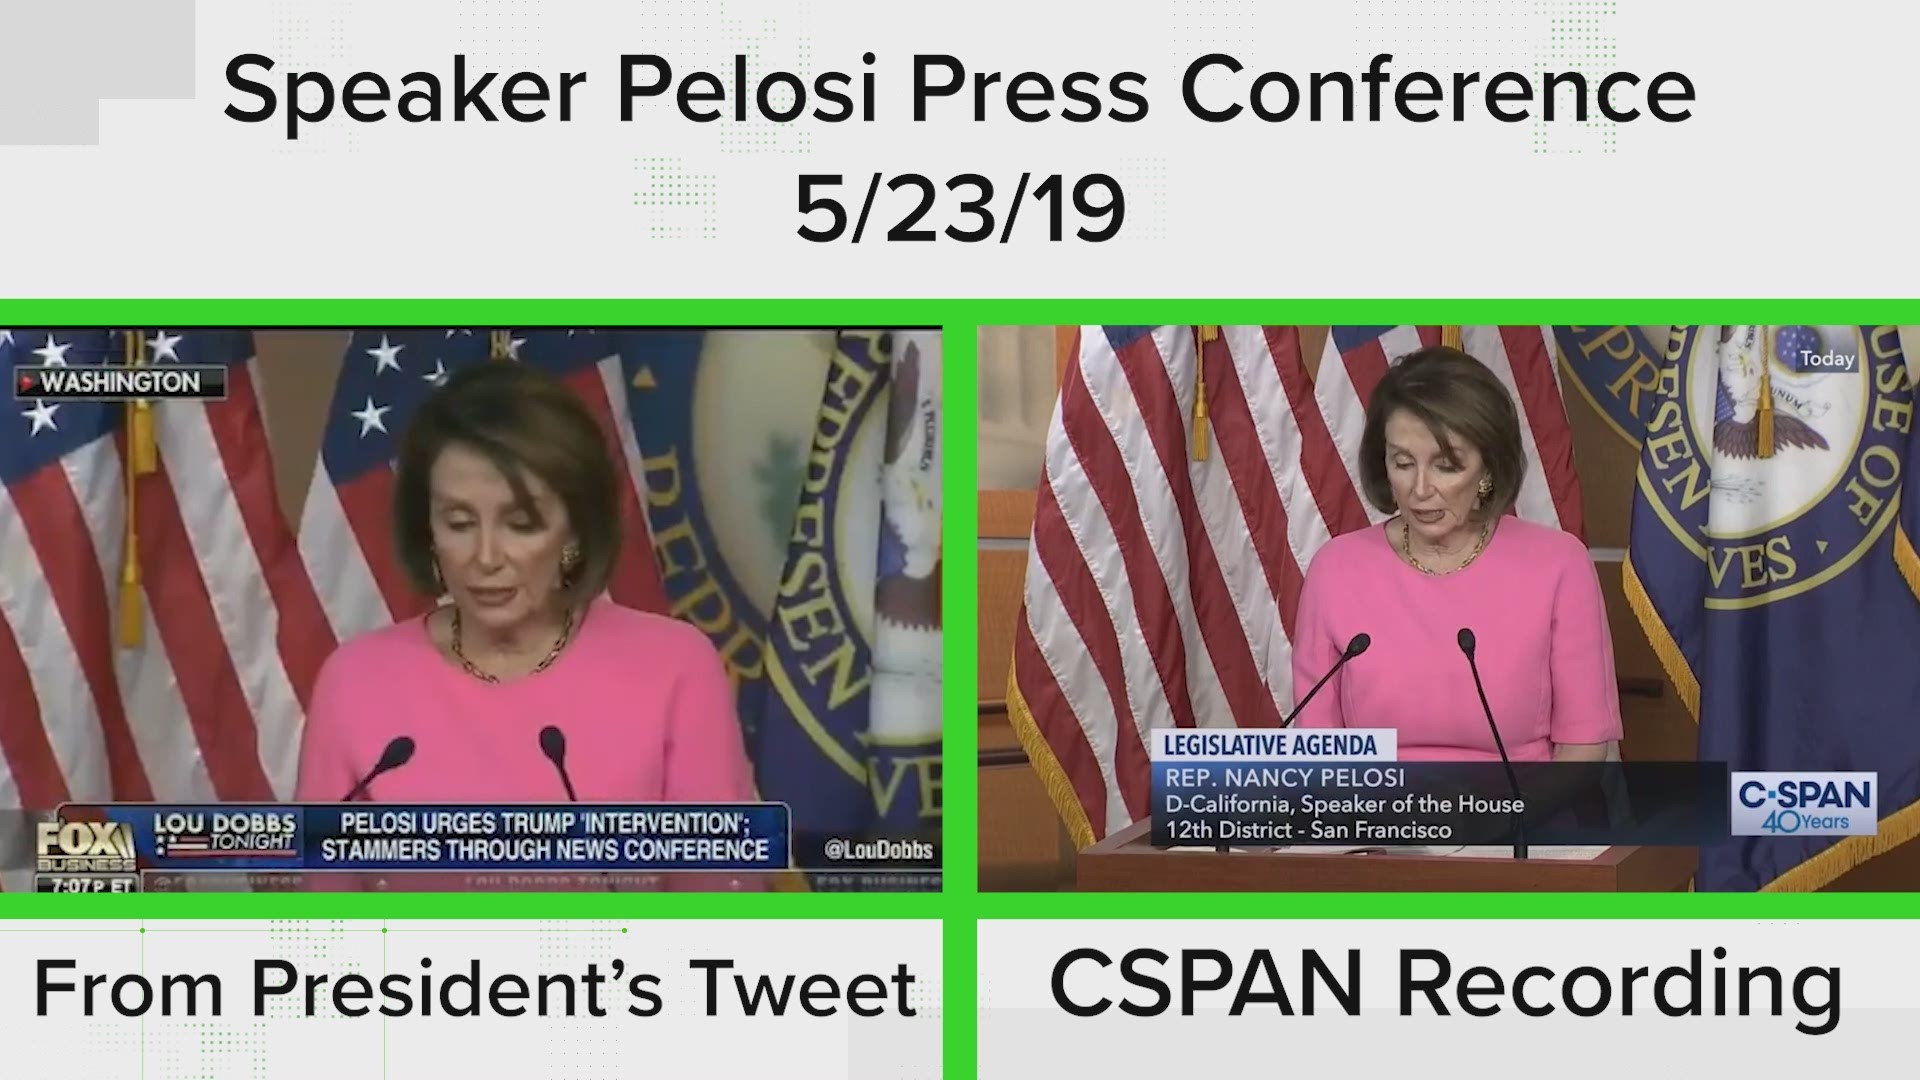 This is a side-by-side comparison of the video tweeted by President Trump and the video from a C-Span recording. While the President's clip highlights 30 seconds to make the Speaker appear bad, the side-by-side shows the clips themselves weren't altered.